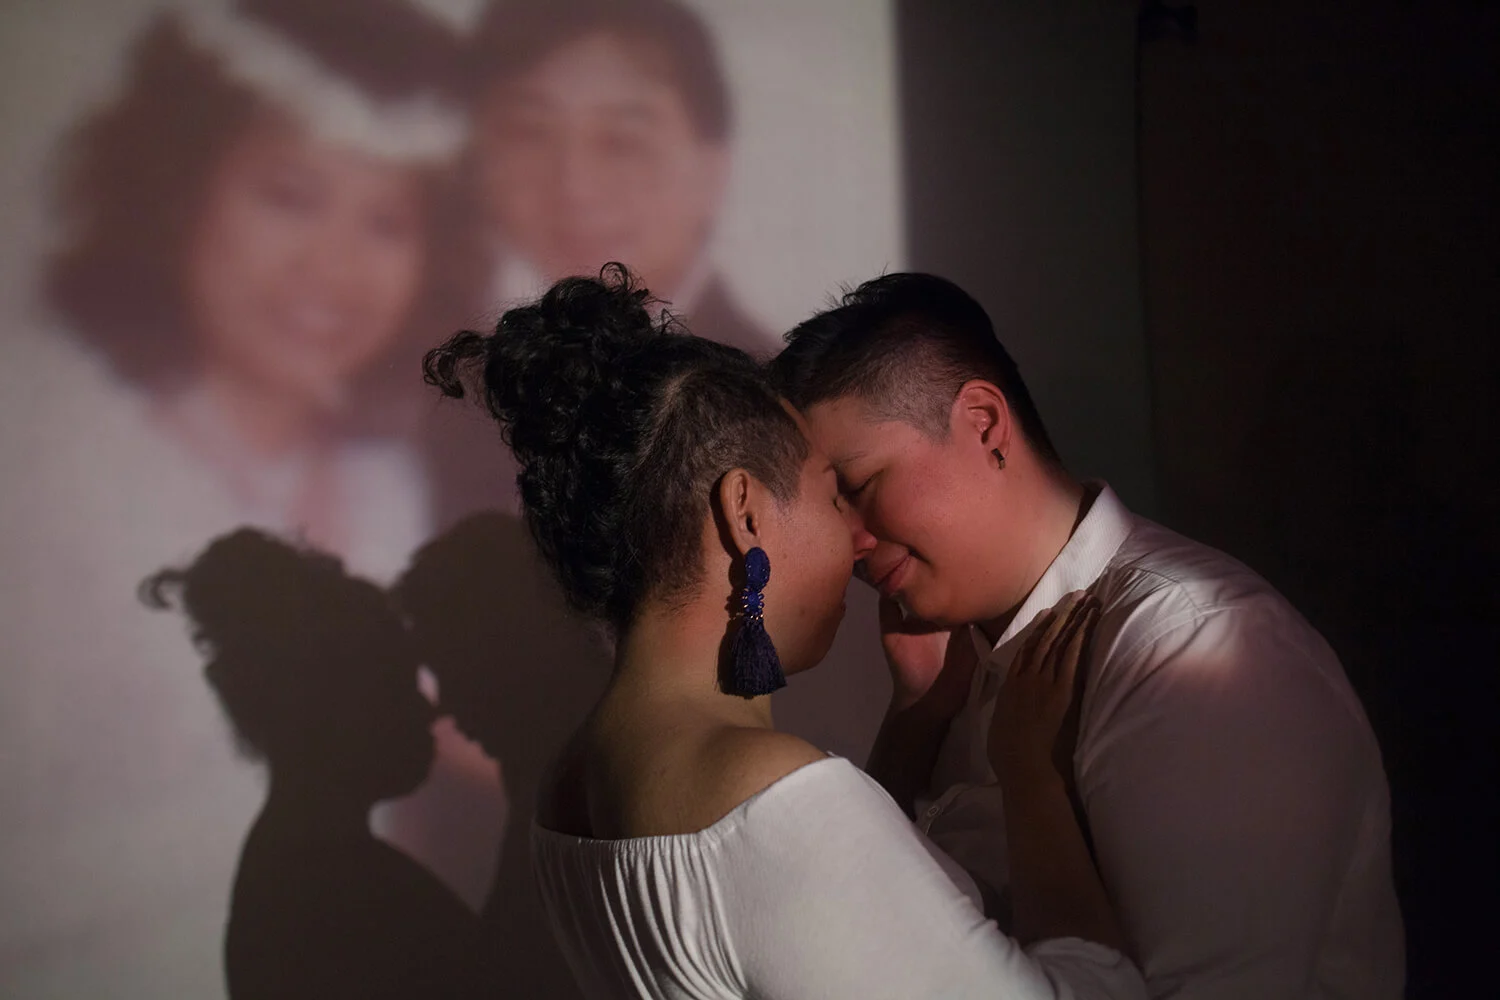 Fi and Liting embrace in front of a wedding portrait of Liting's parents. They envisage walking down the aisle to Young Volcanoes by Fall Out Boy.